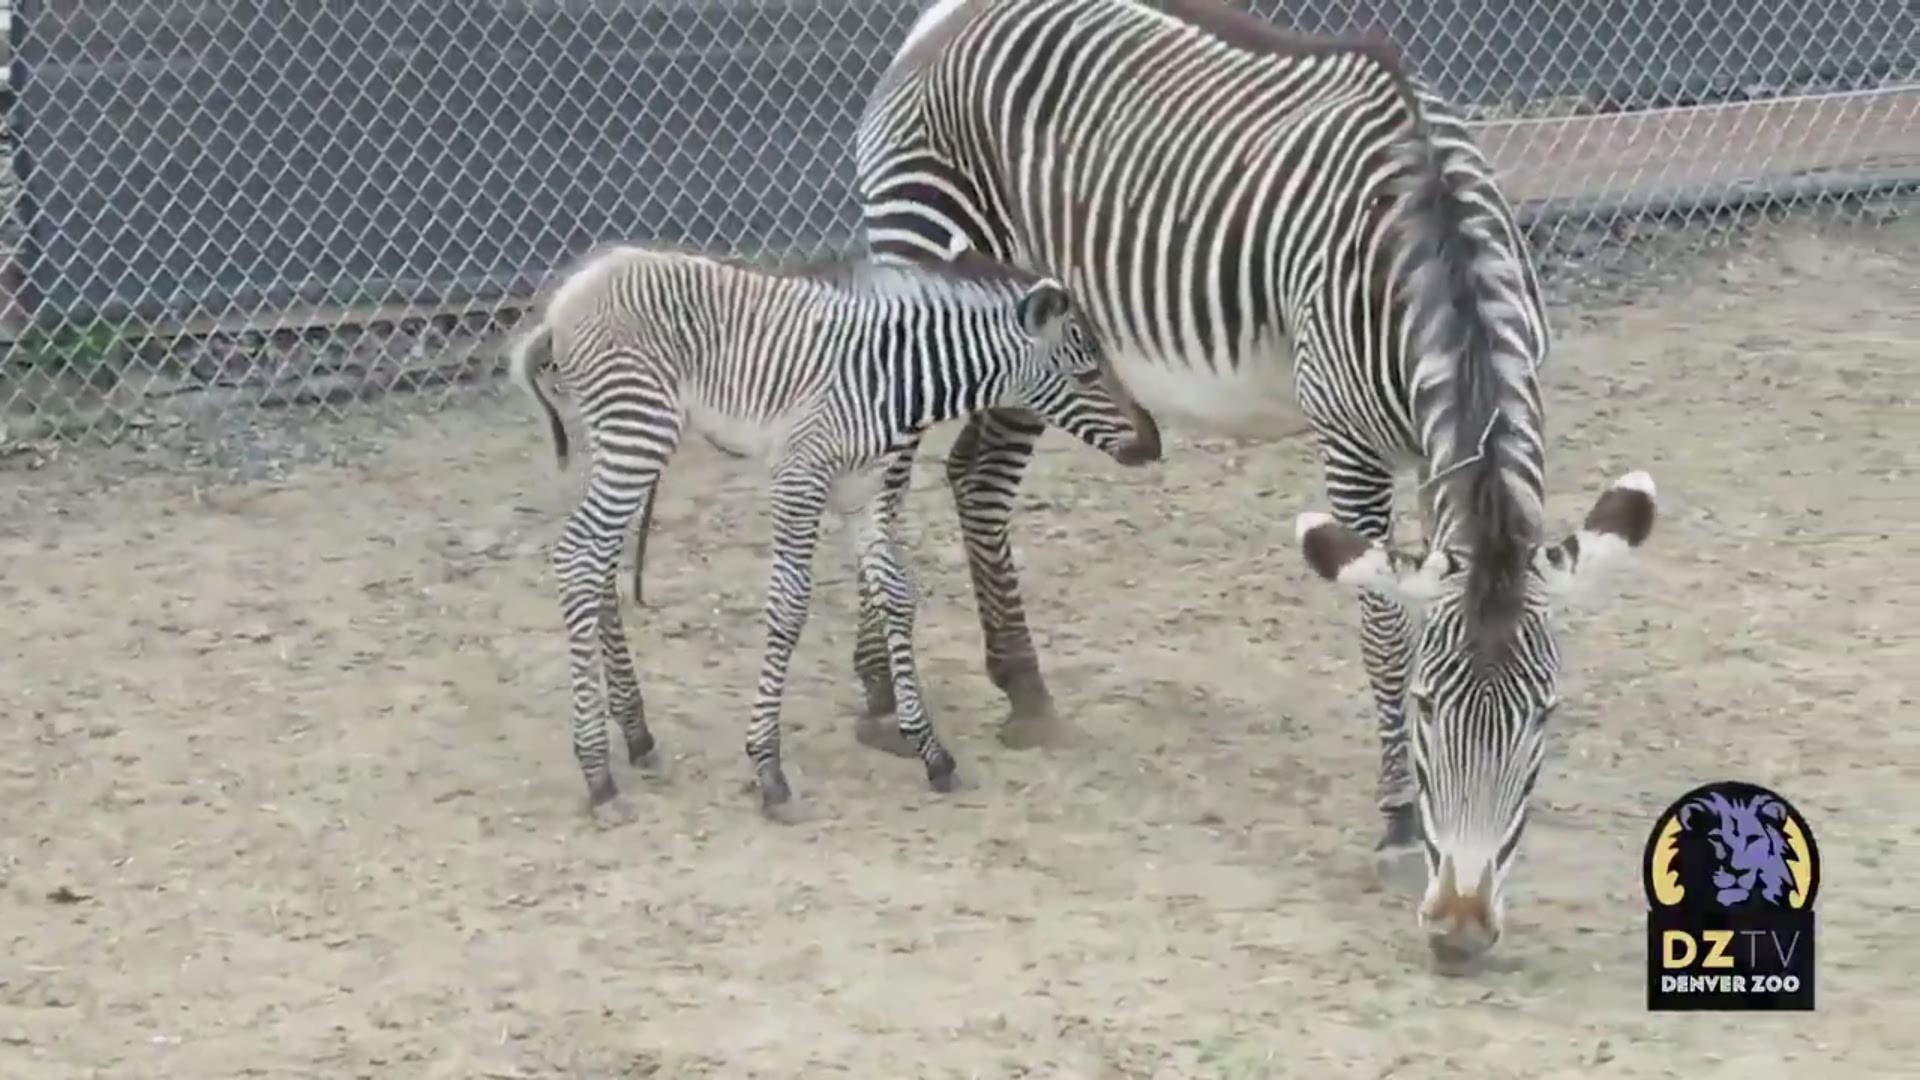 The Denver Zoo announced a baby zebra boy was born on Wednesday, May 8!